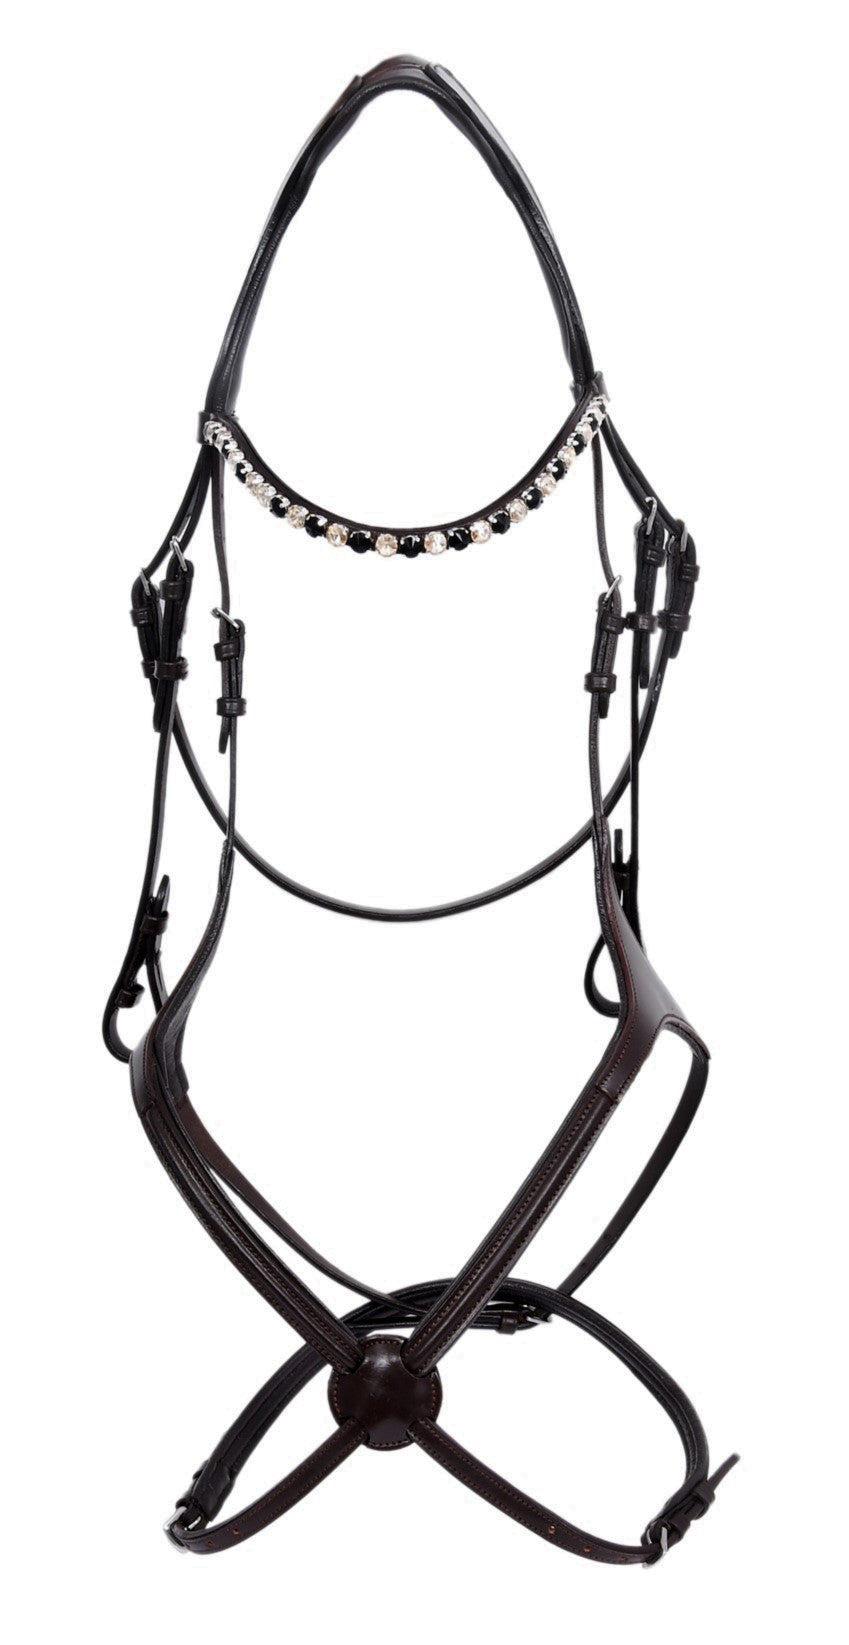 LEATHER HORSE SHOW BRIDLE.JPG